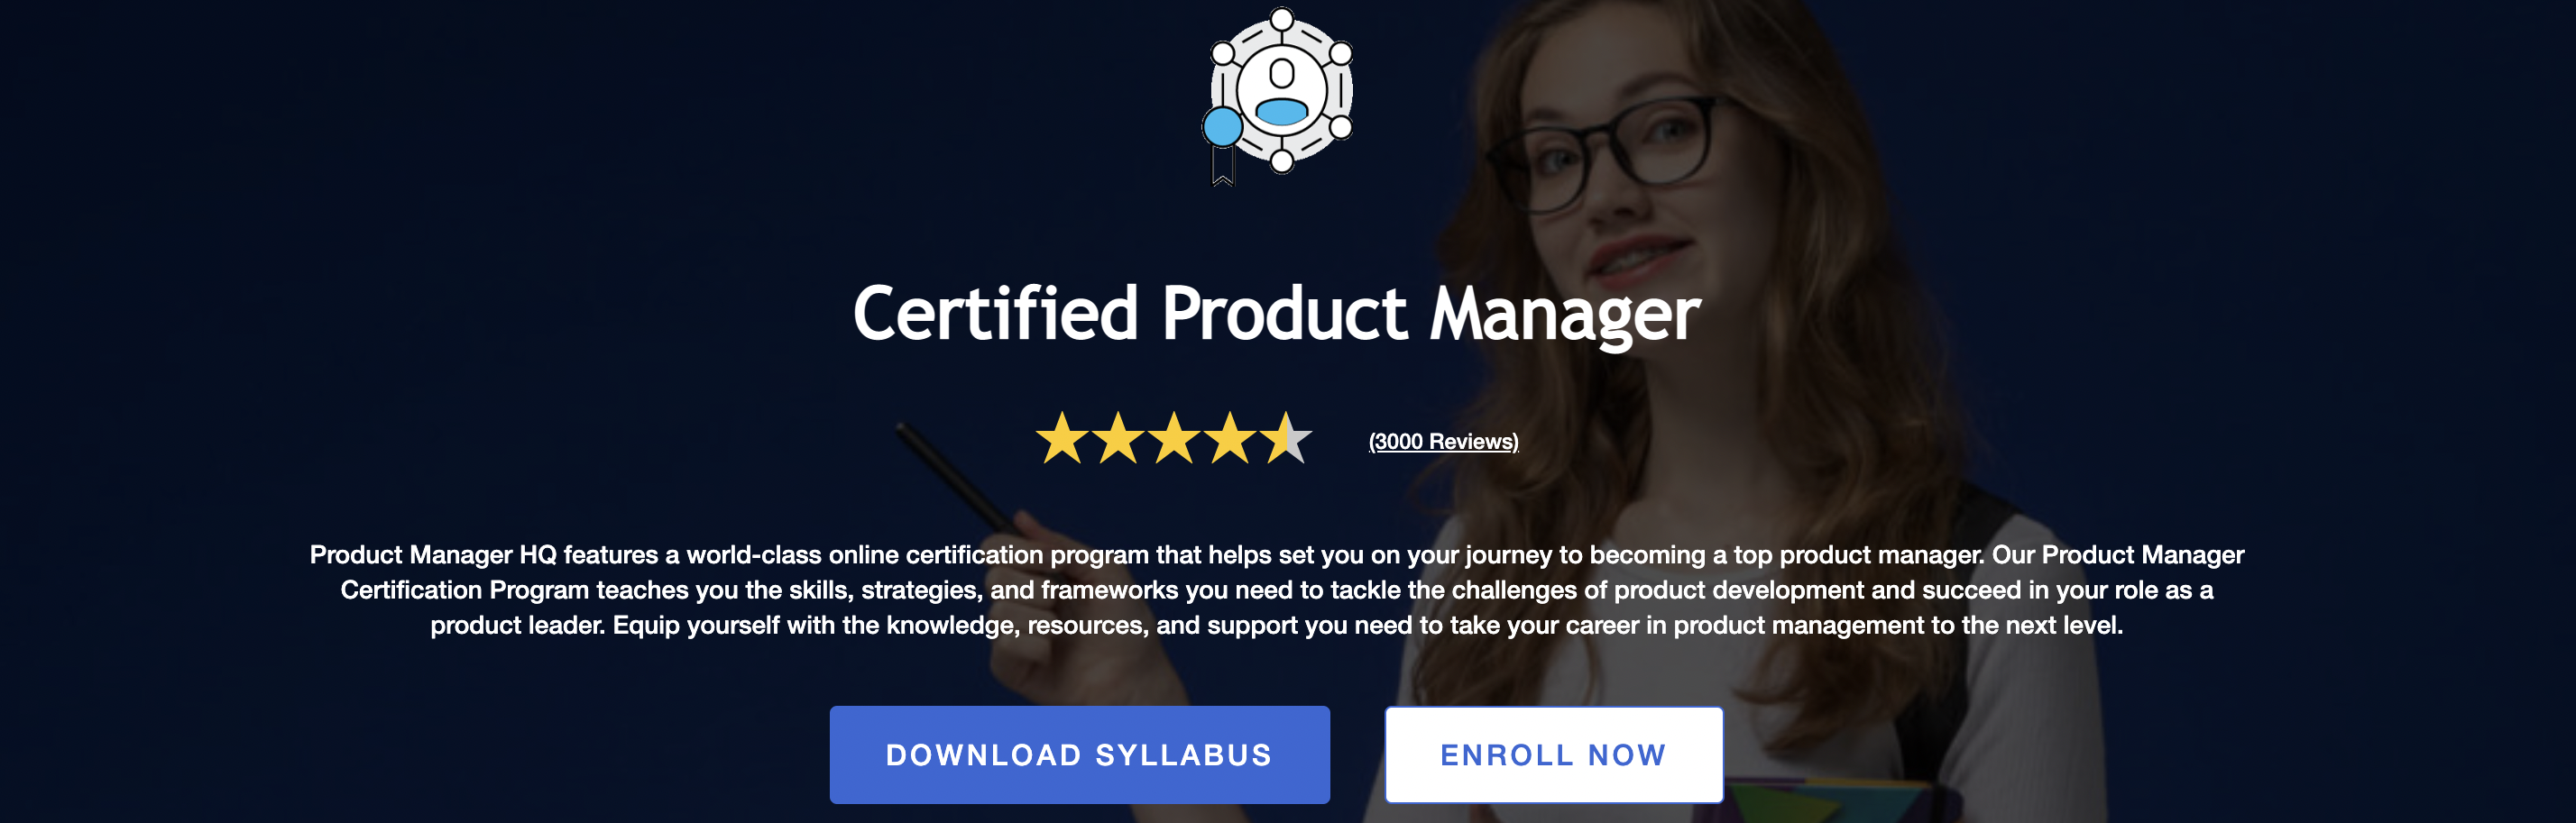 Certified Product Manager